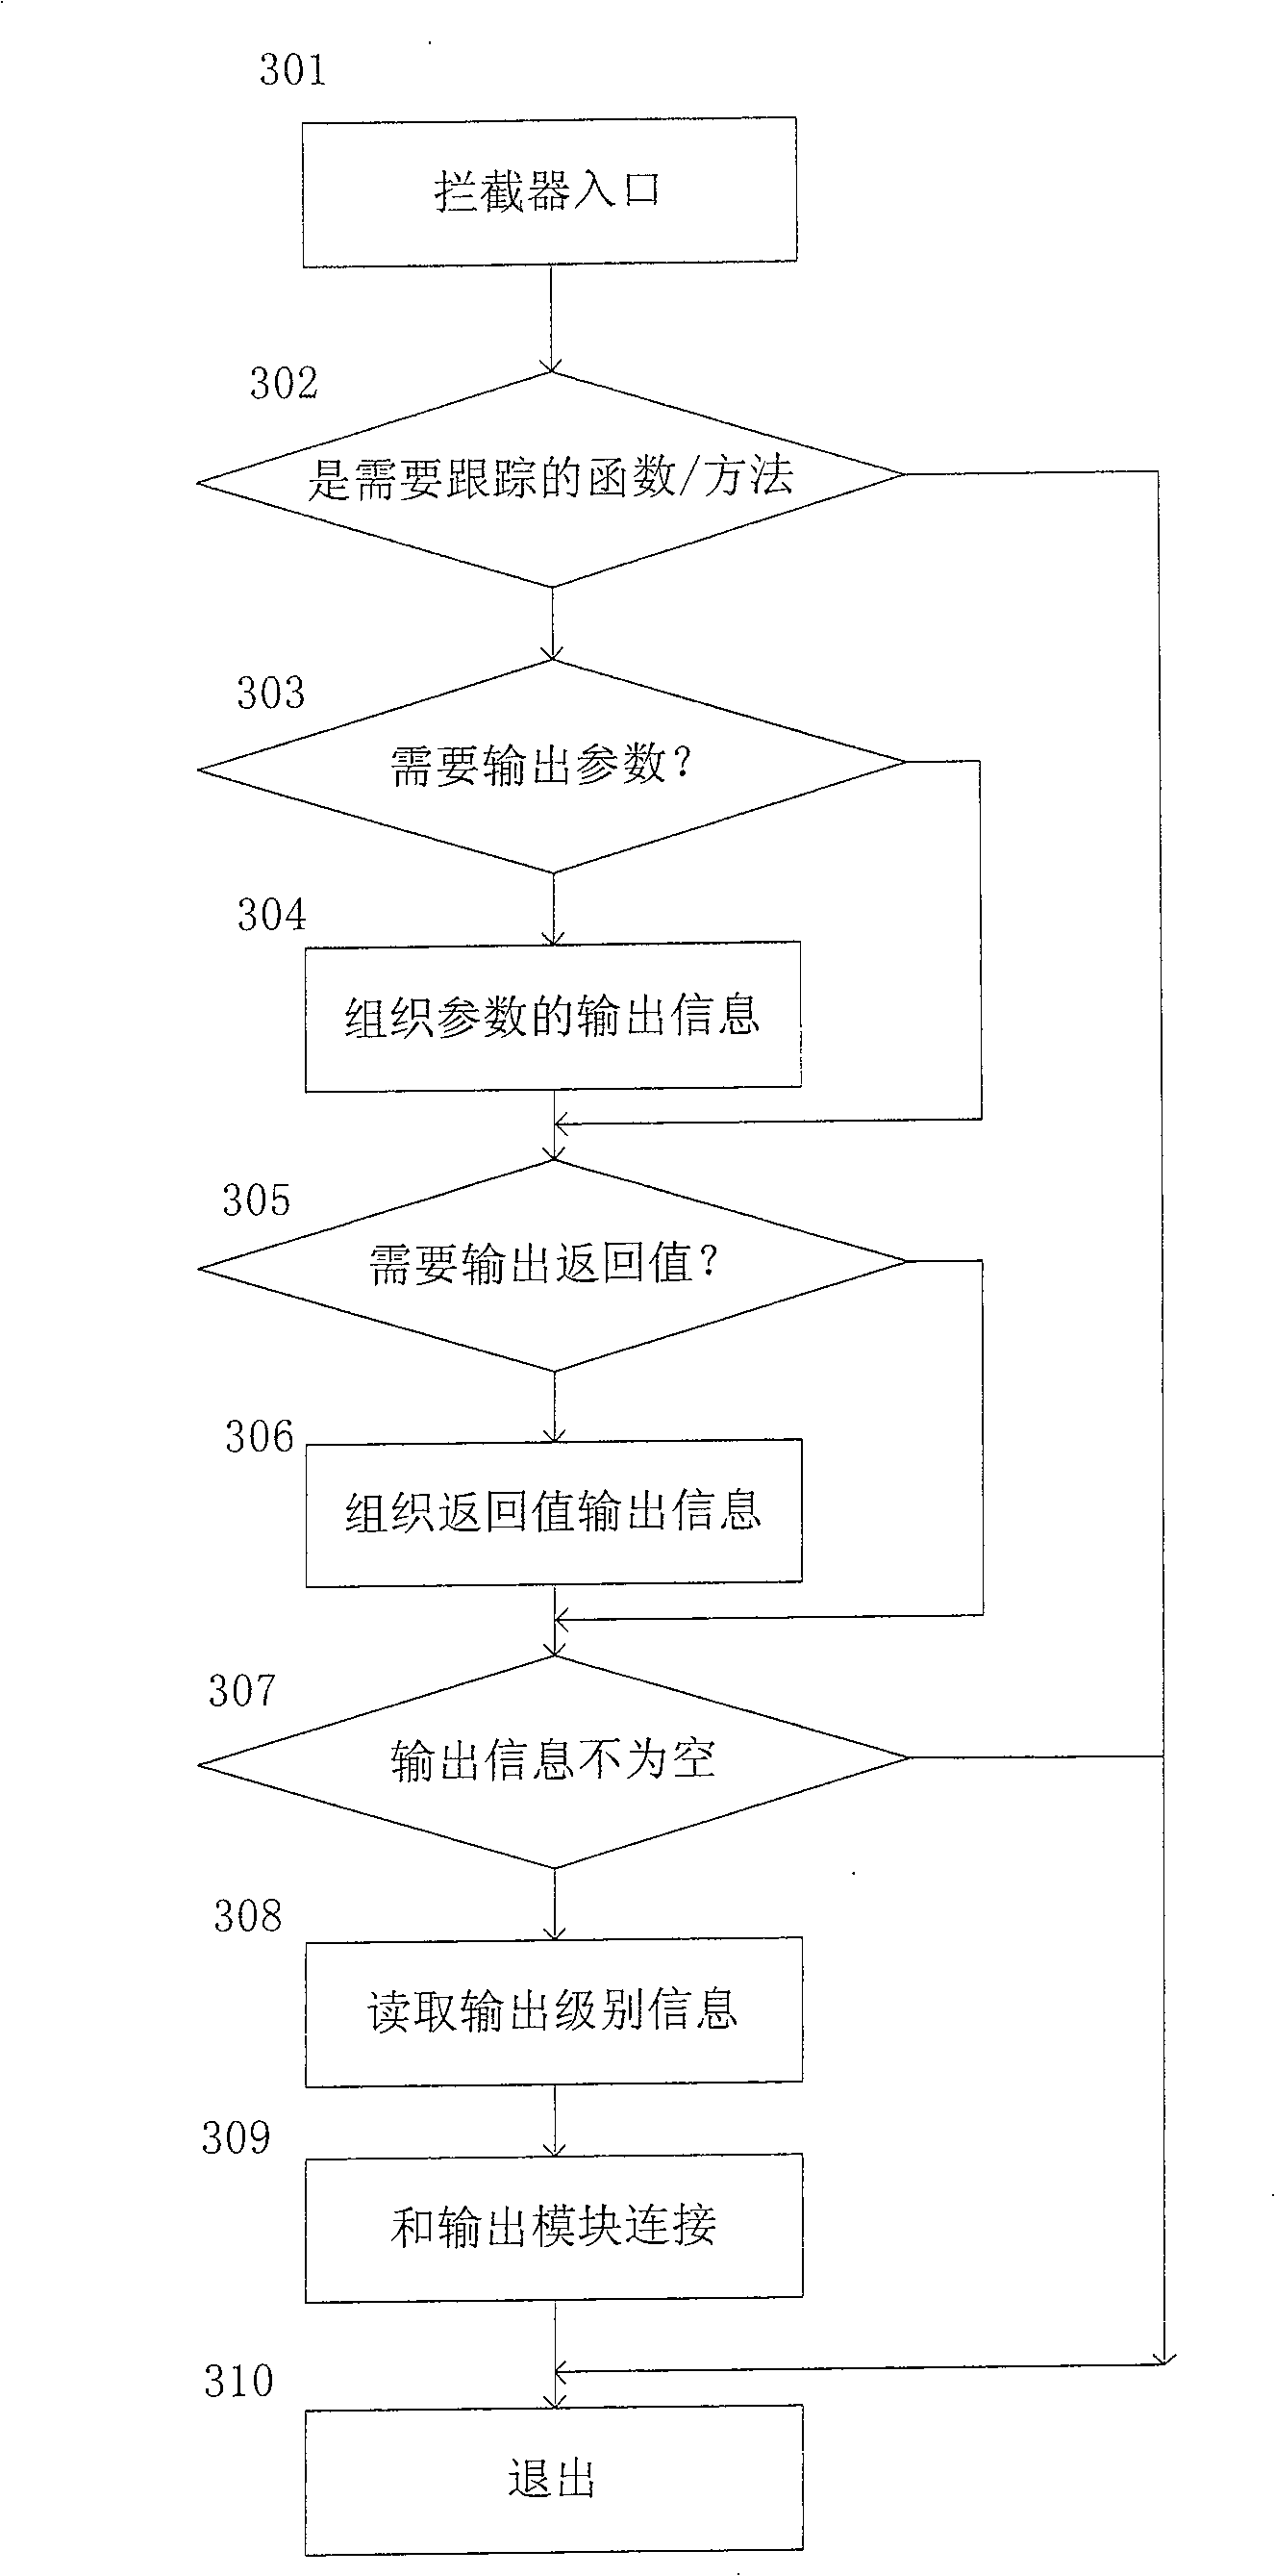 Function call tracking system and method